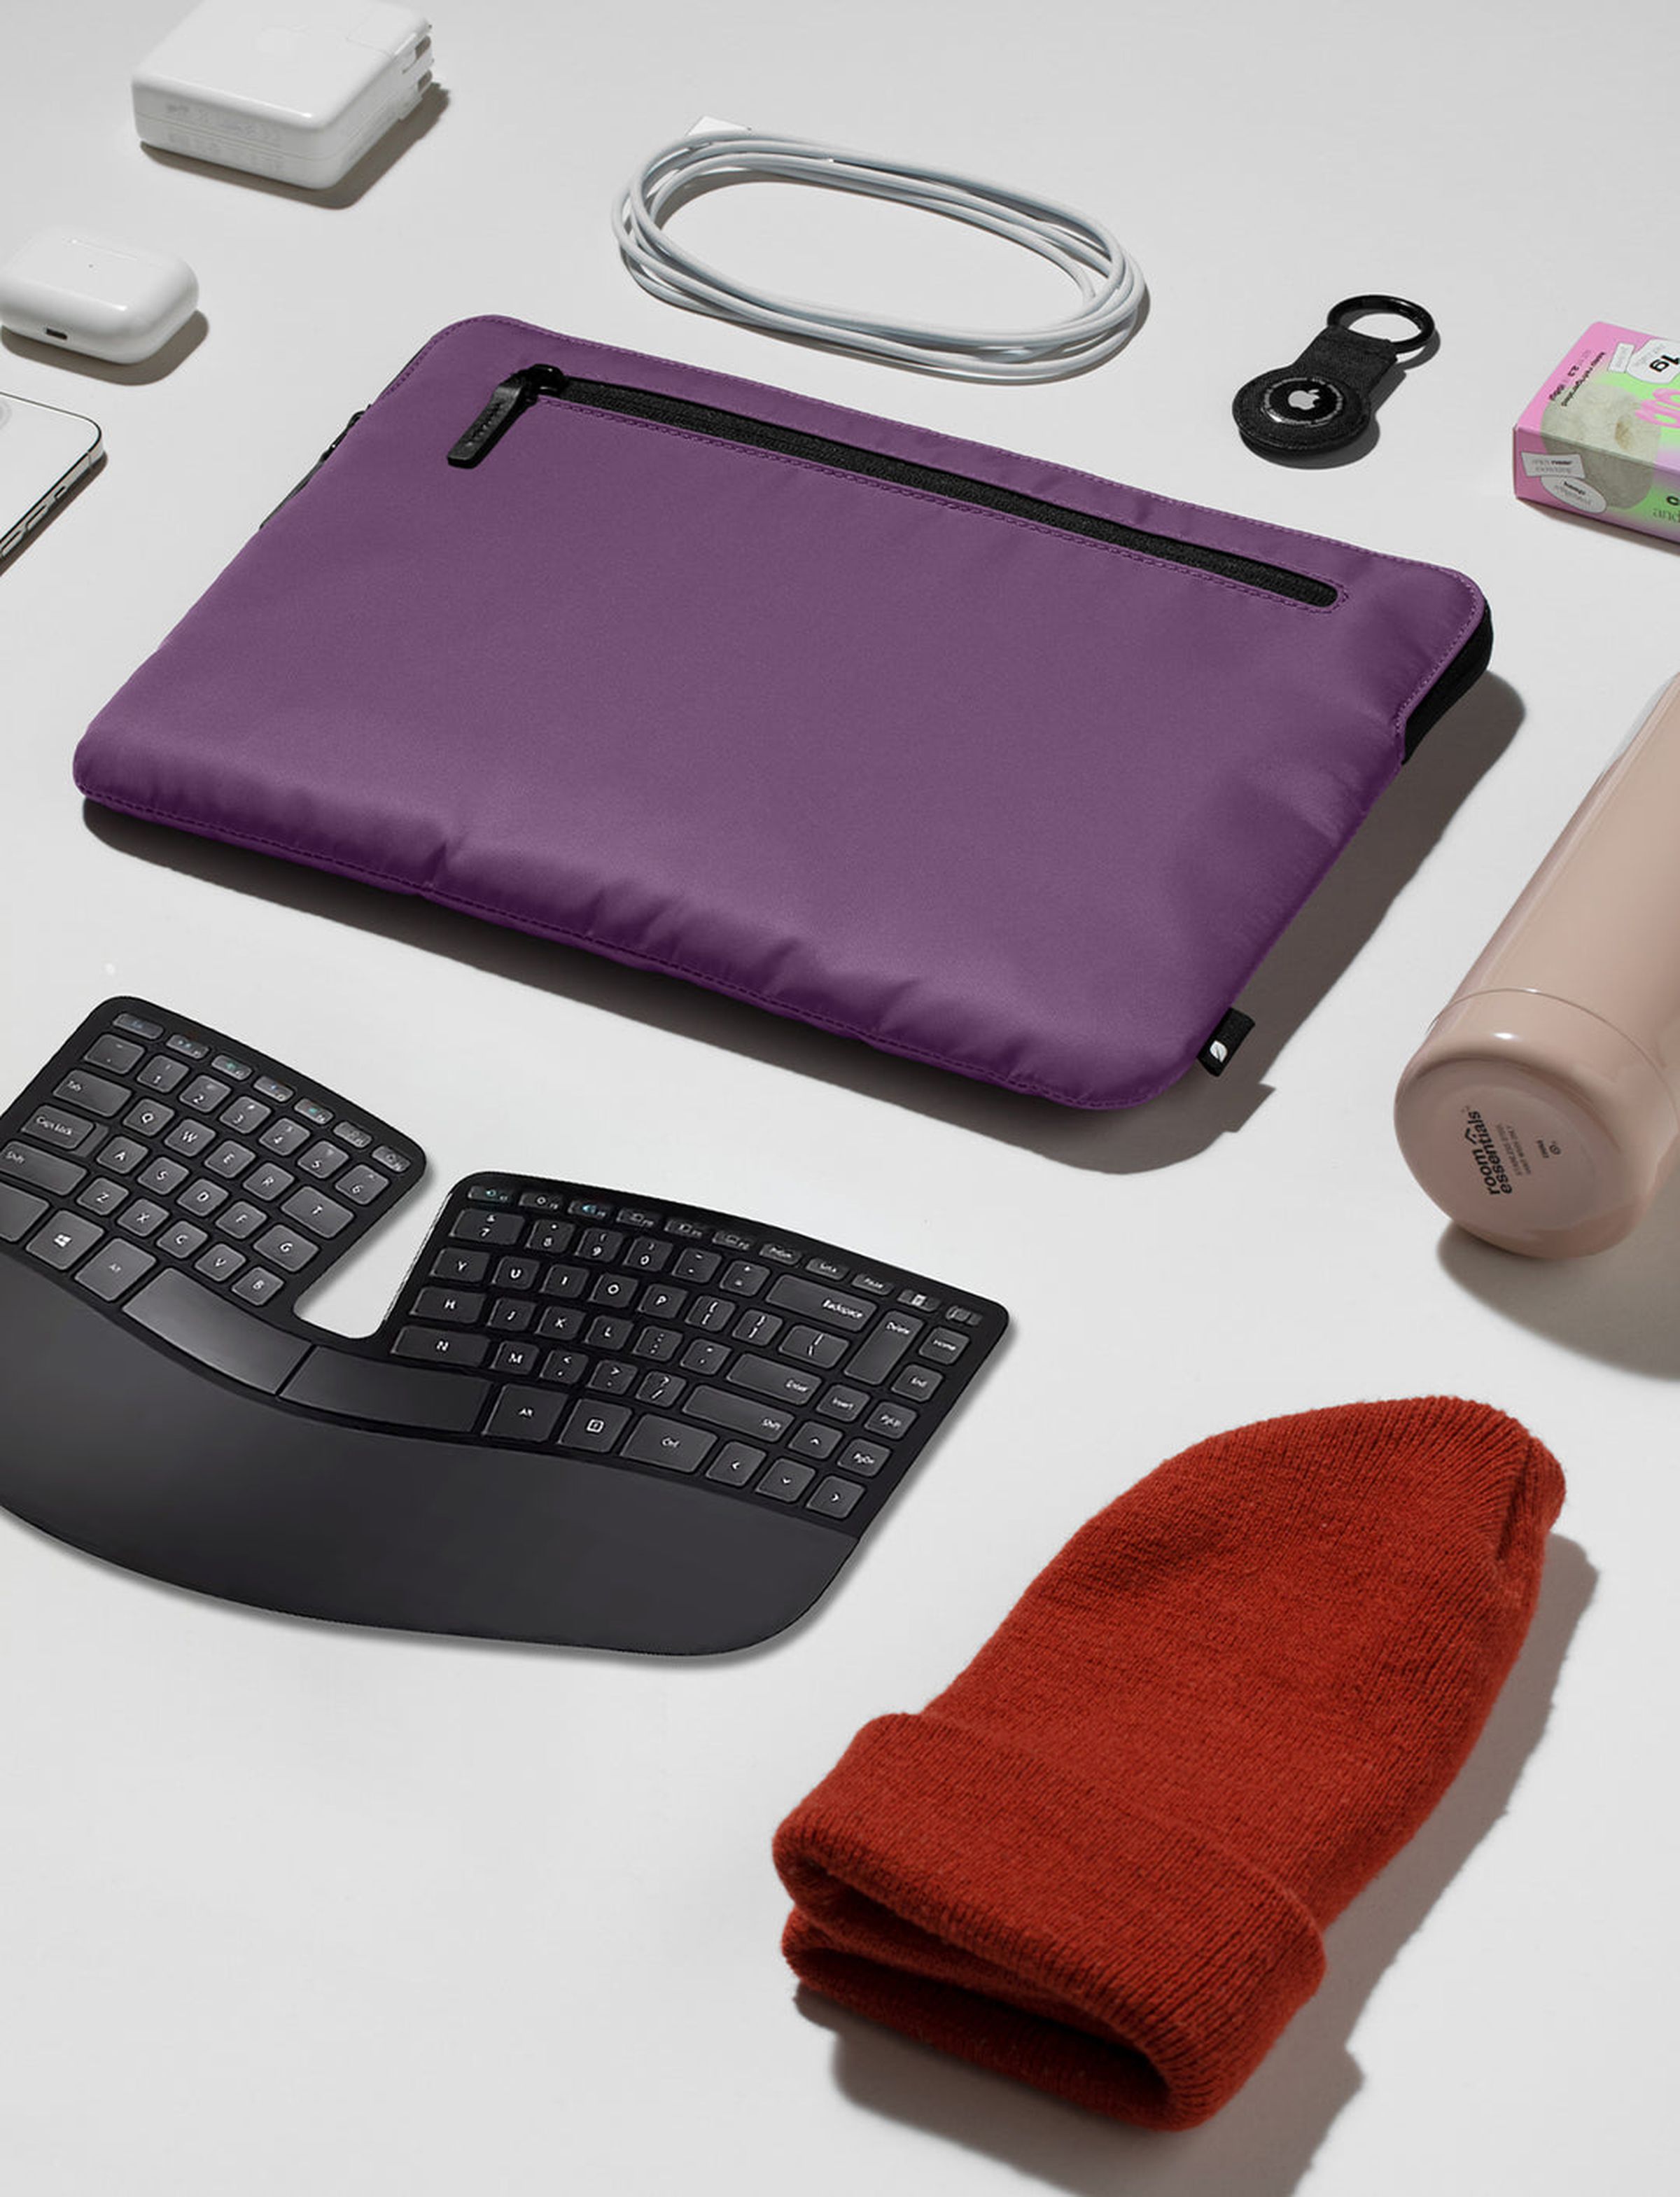 Microsoft’s ergonomic keyboards will also continue under the Incase, designed by Microsoft brand.